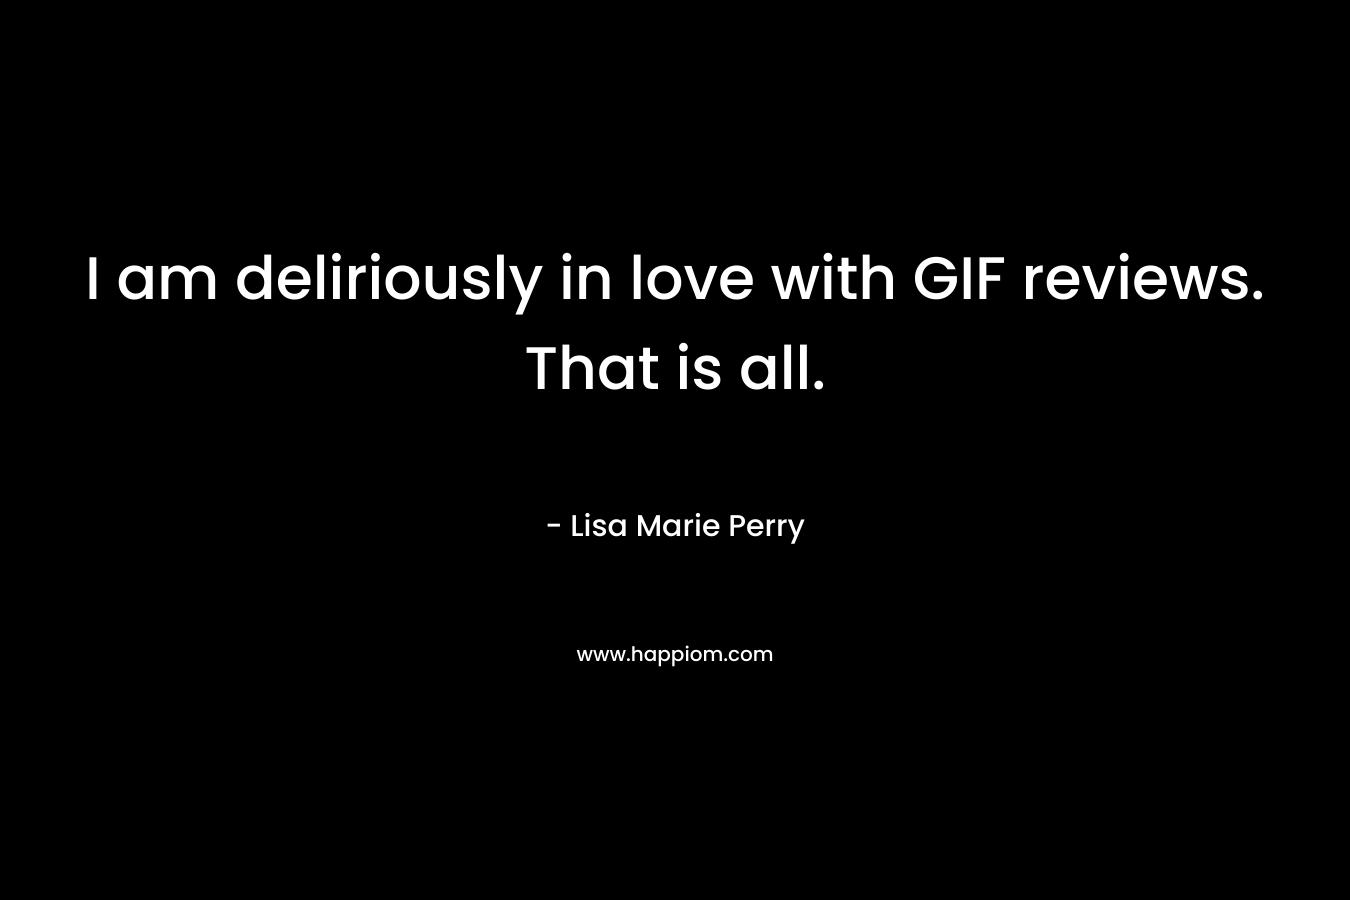 I am deliriously in love with GIF reviews. That is all.